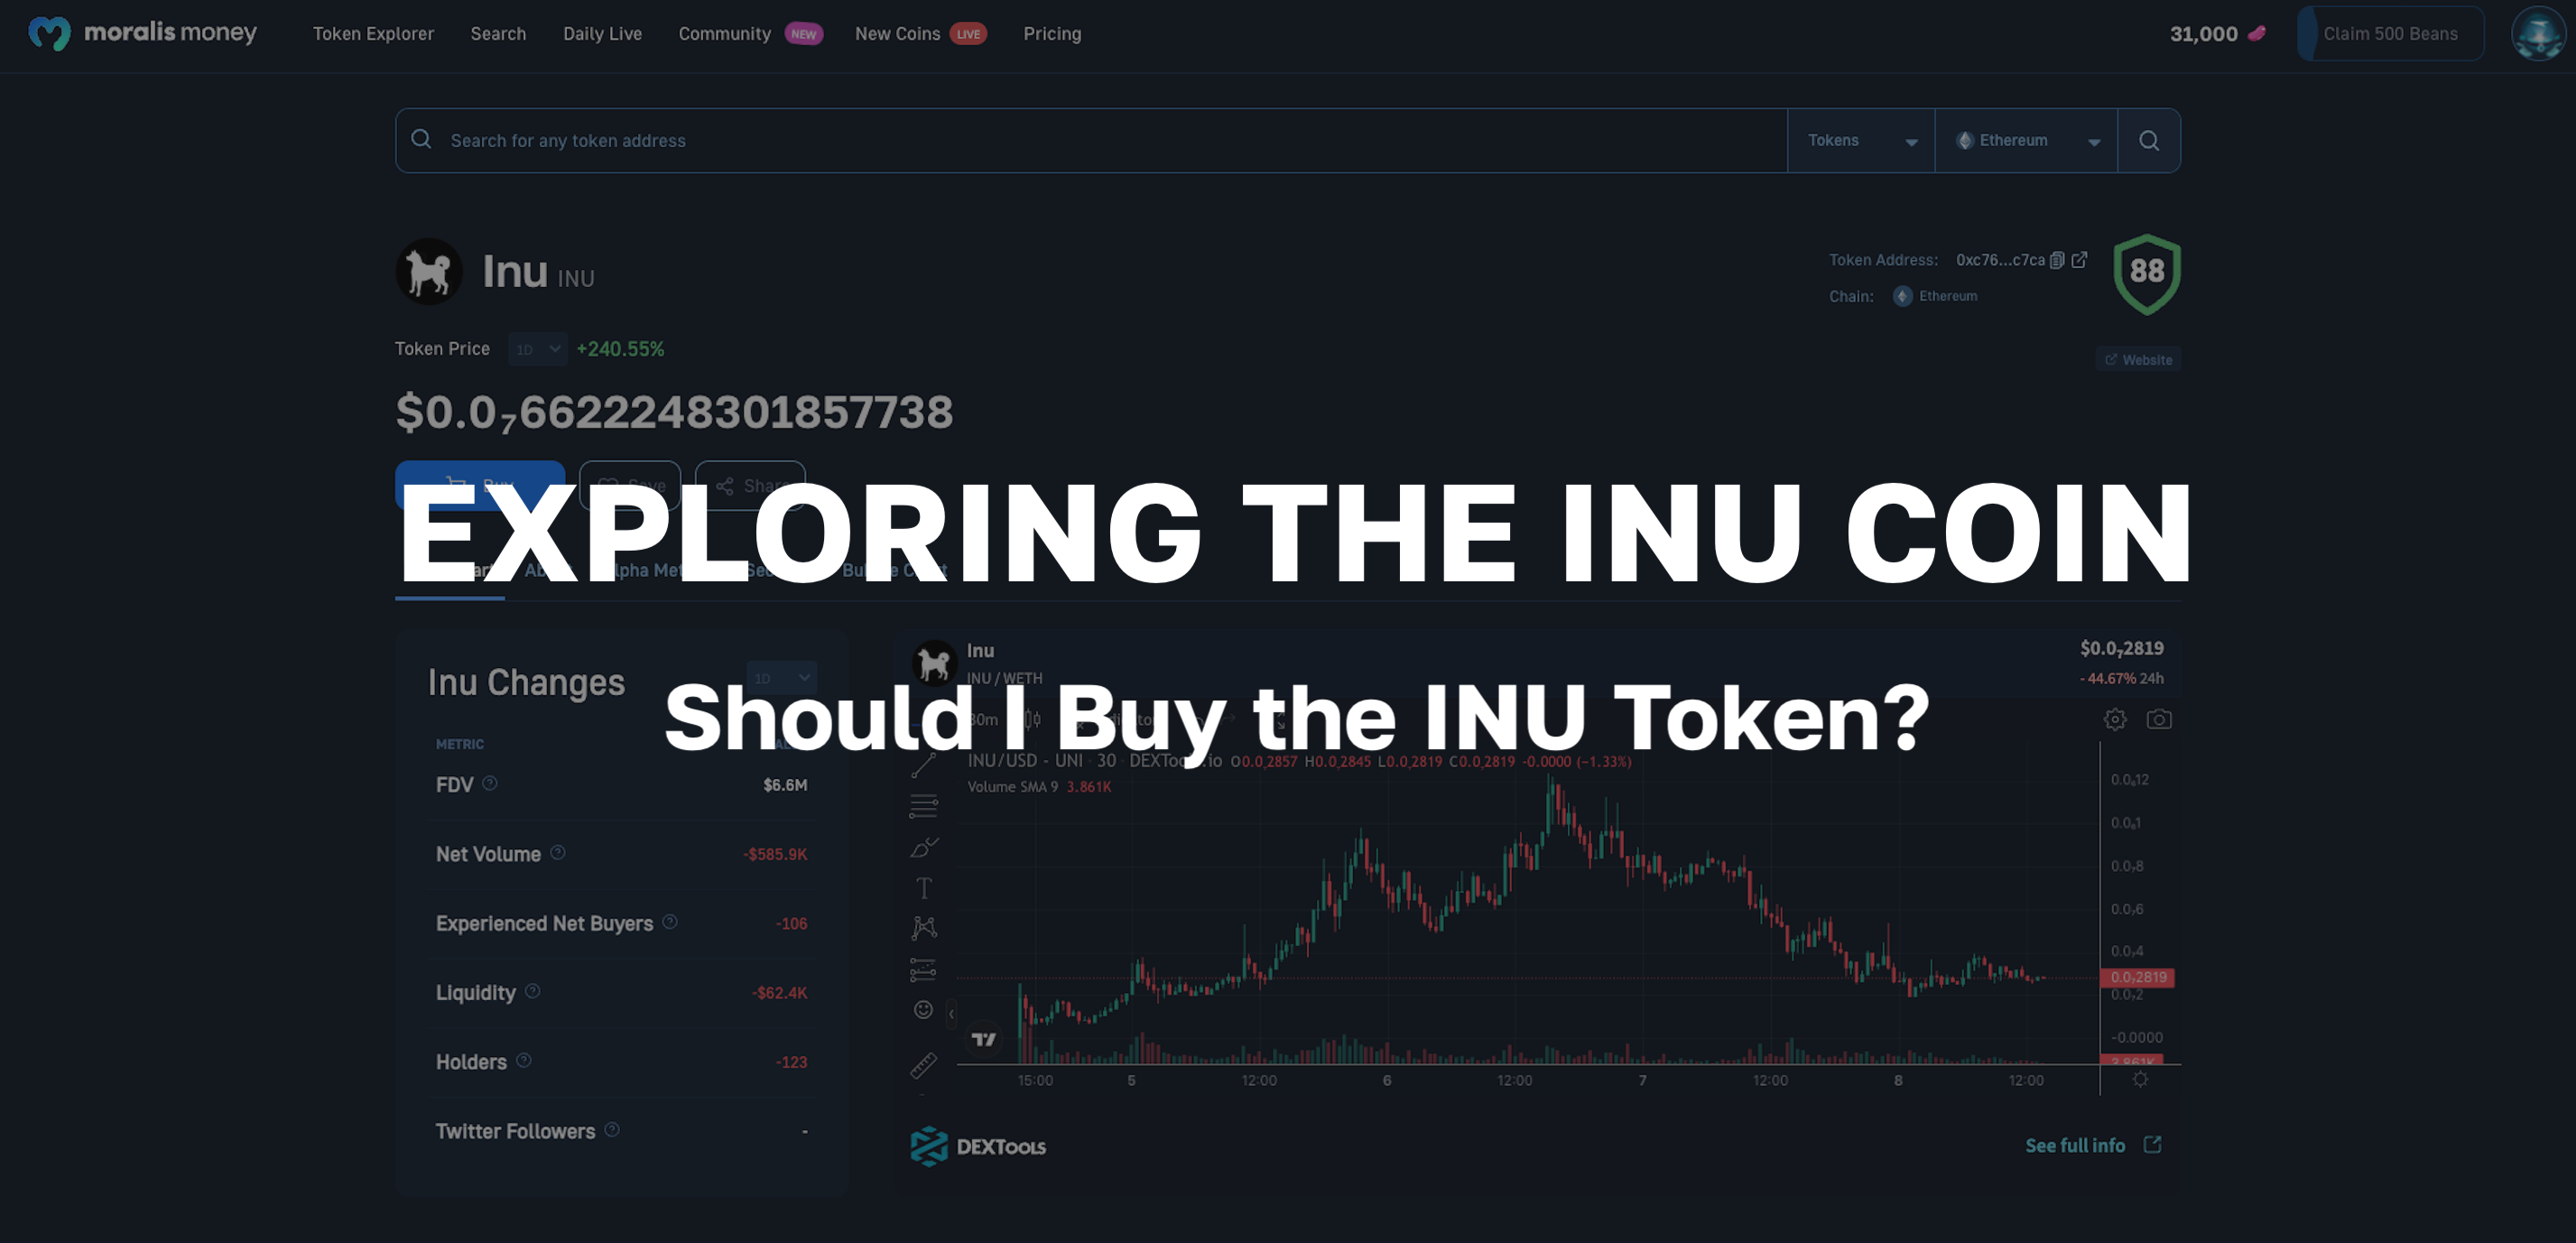 Exploring the INU Coin - Should I Buy the INU Token?